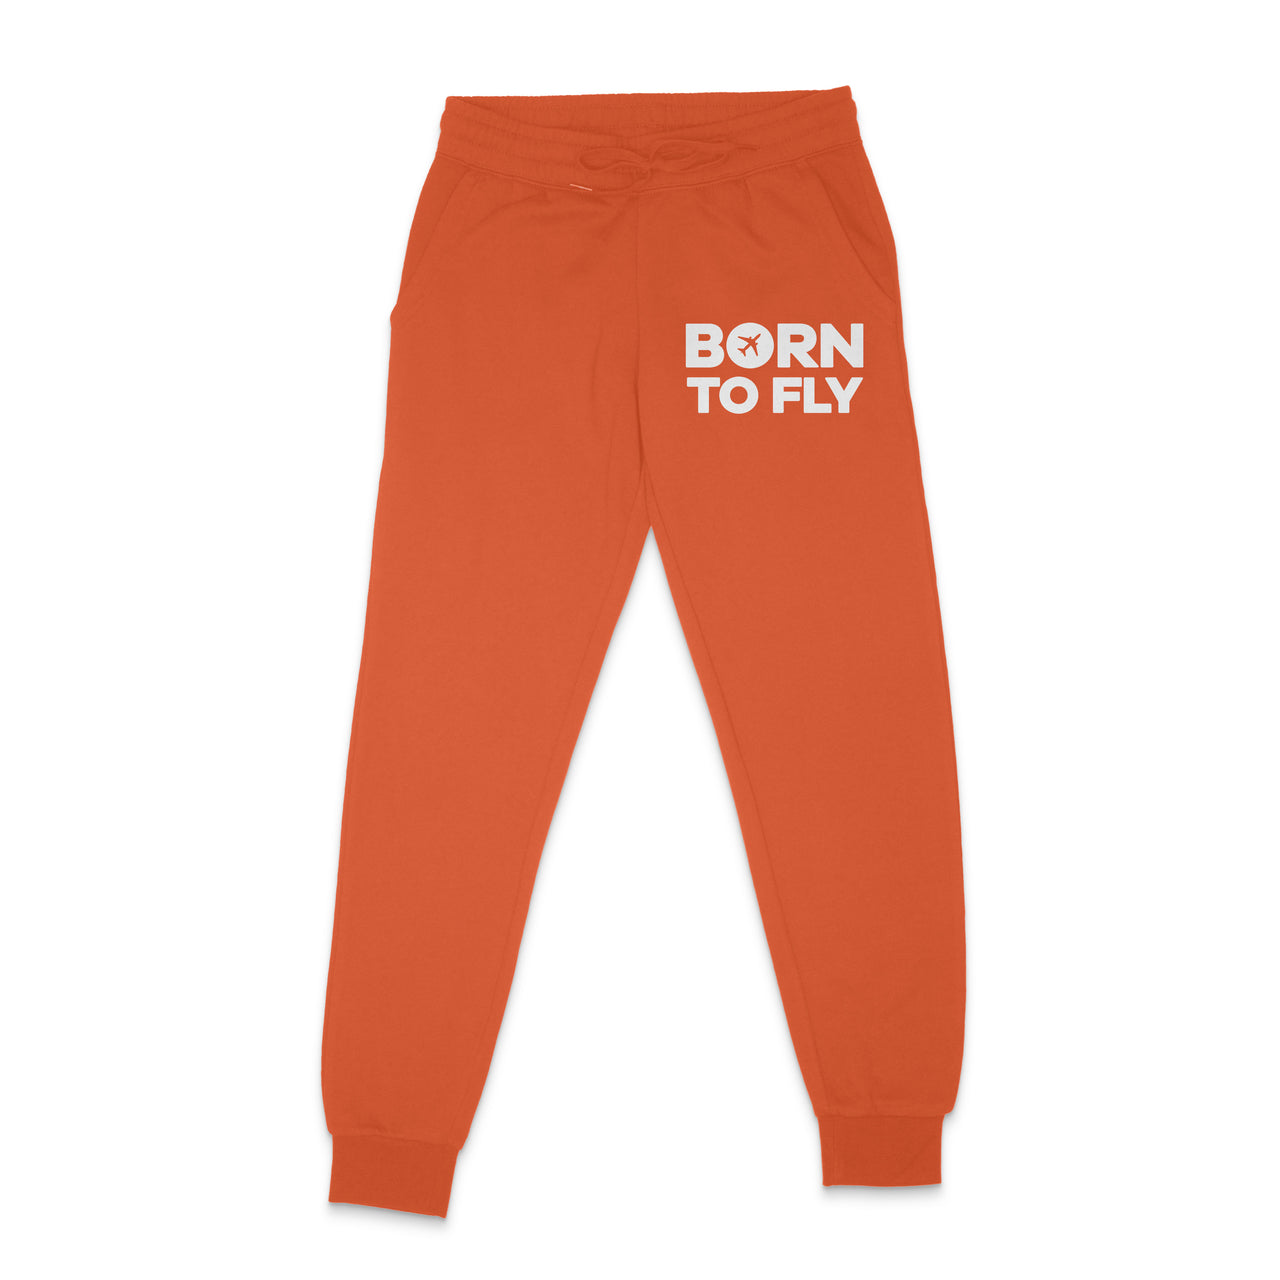 Born To Fly Special Designed Sweatpants